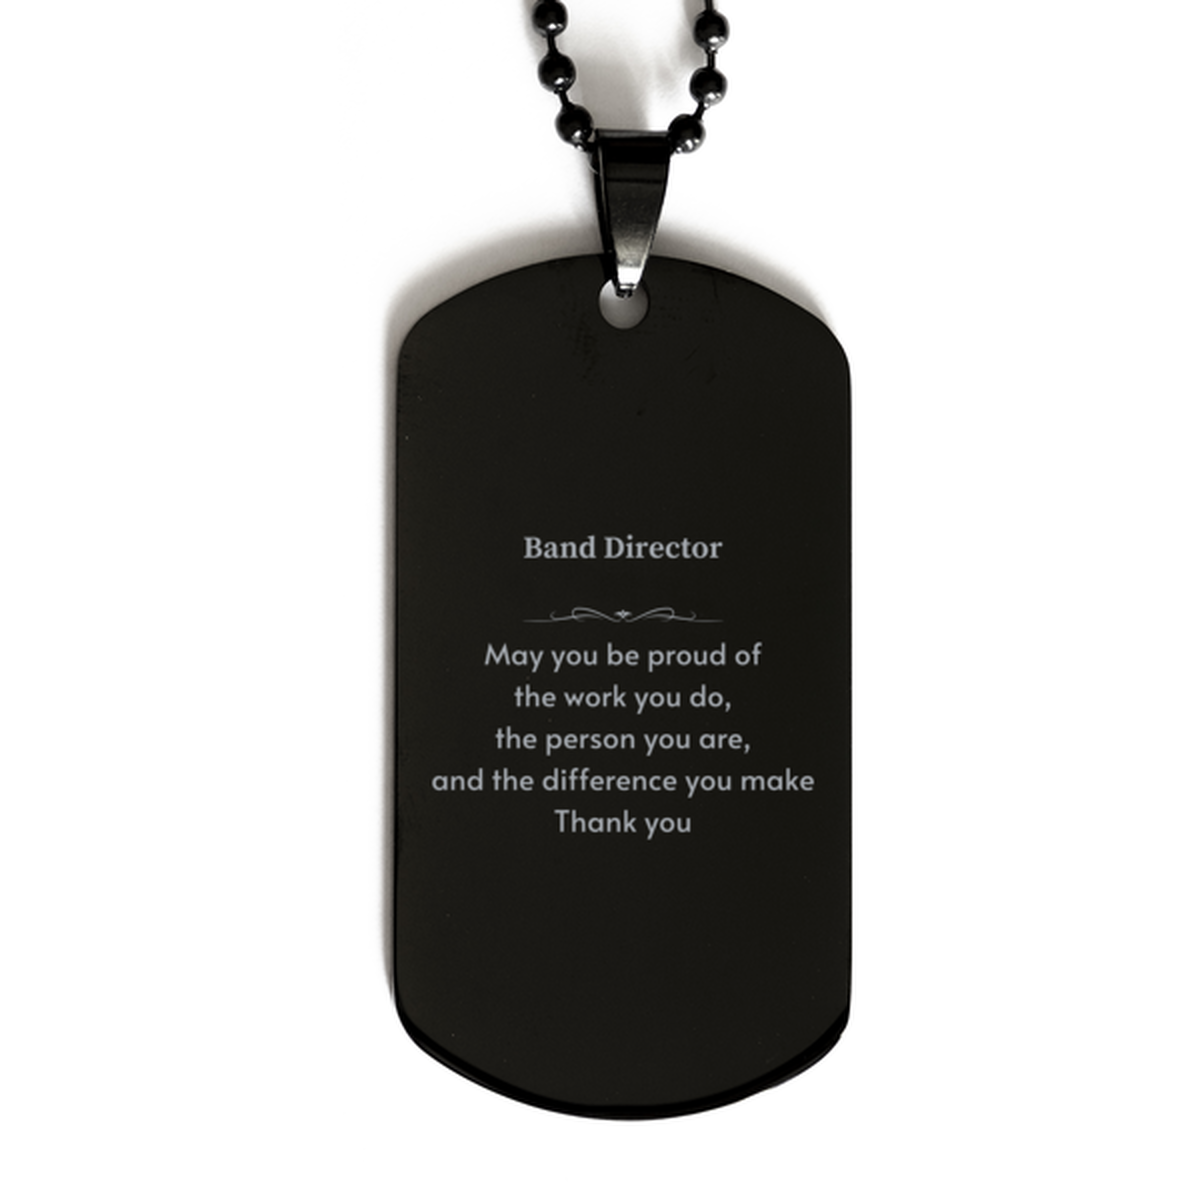 Heartwarming Black Dog Tag Retirement Coworkers Gifts for Band Director, Band Director May You be proud of the work you do, the person you are Gifts for Boss Men Women Friends